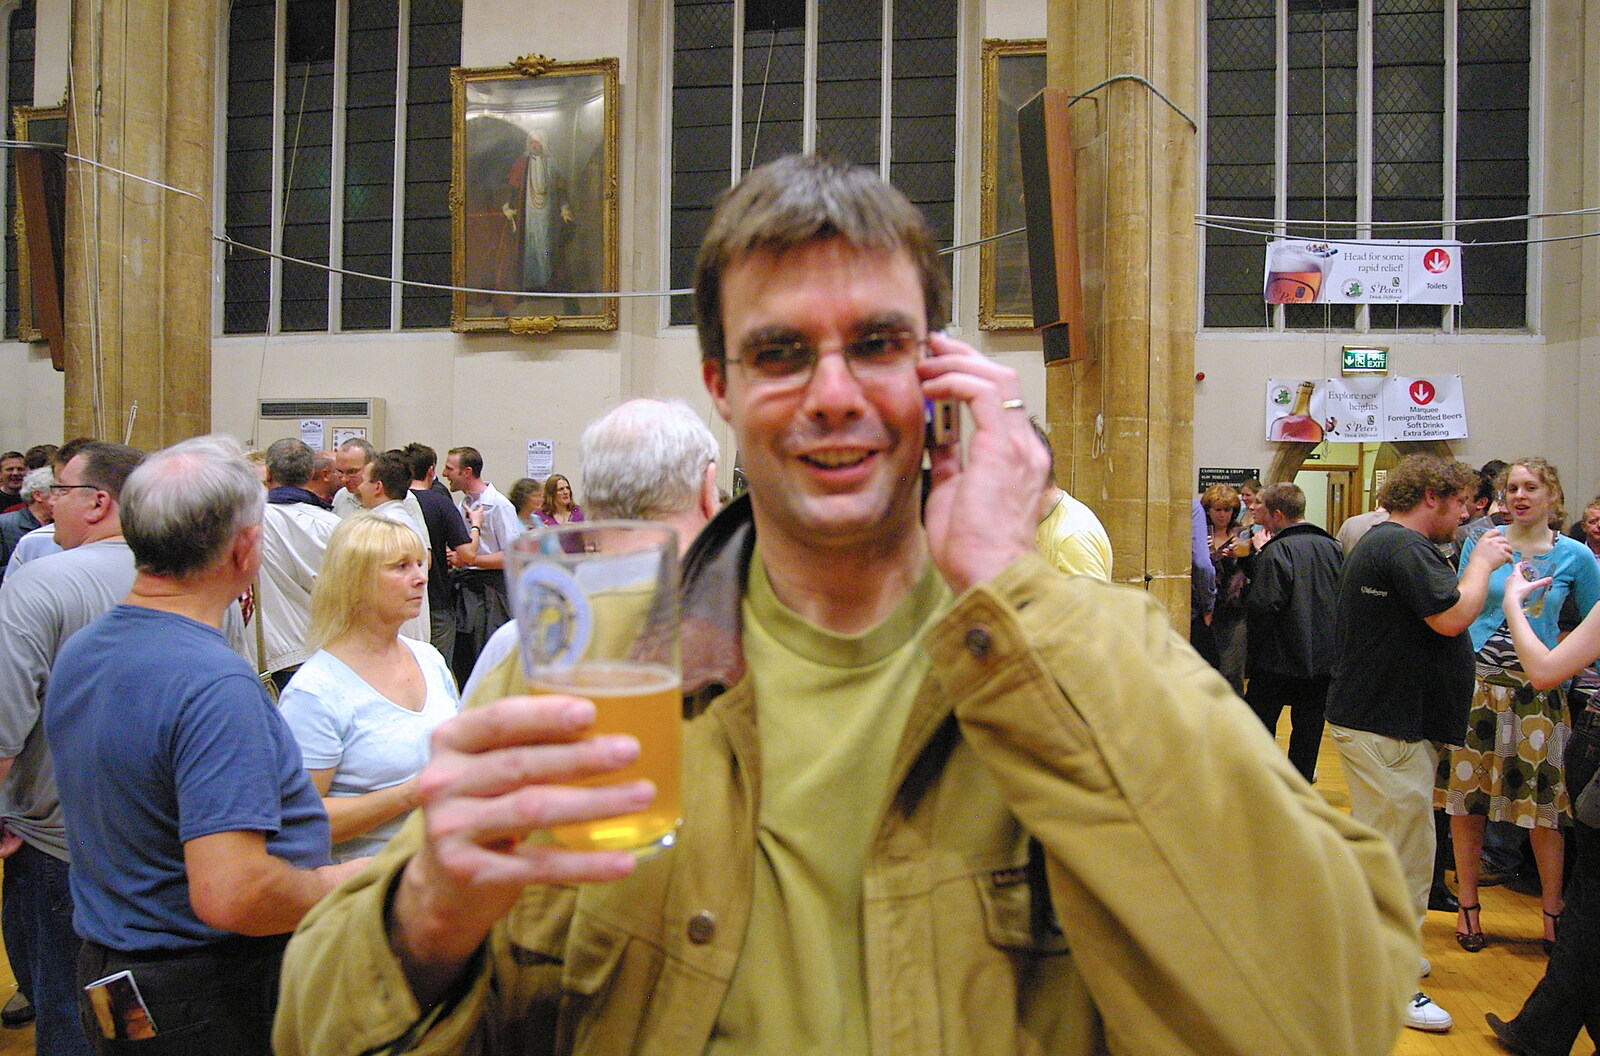 Parrott (40) phones his mum for a lift from The 28th Norwich Beer Festival, St. Andrew's Hall, Norwich - 26th October 2005